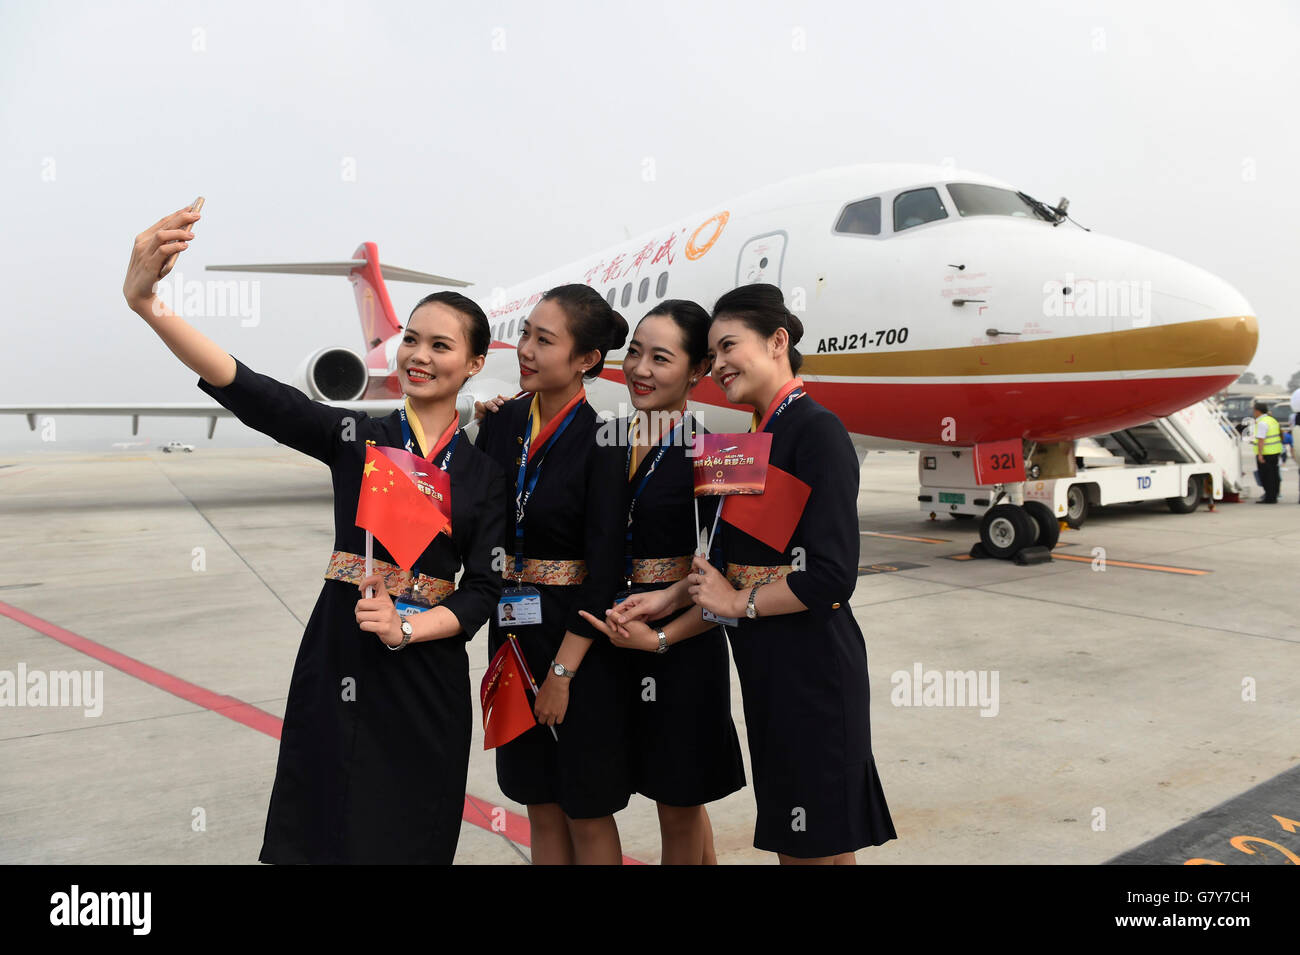 Chengdu, China's Sichuan Province. 28th June, 2016. Stewardesses pose for a photo in front of Chengdu Airlines' ARJ21 in Chengdu Shuangliu International Airport in Chengdu, capital of southwest China's Sichuan Province, June 28, 2016. ARJ21, manufactured by the Commercial Aircraft Corp. of China (COMAC), made its maiden commercial flight from Chengdu to Shanghai Tuesday. The domestically-designed airliner is China's first regional jet manufactured according to international standards. © Liu Kun/Xinhua/Alamy Live News Stock Photo